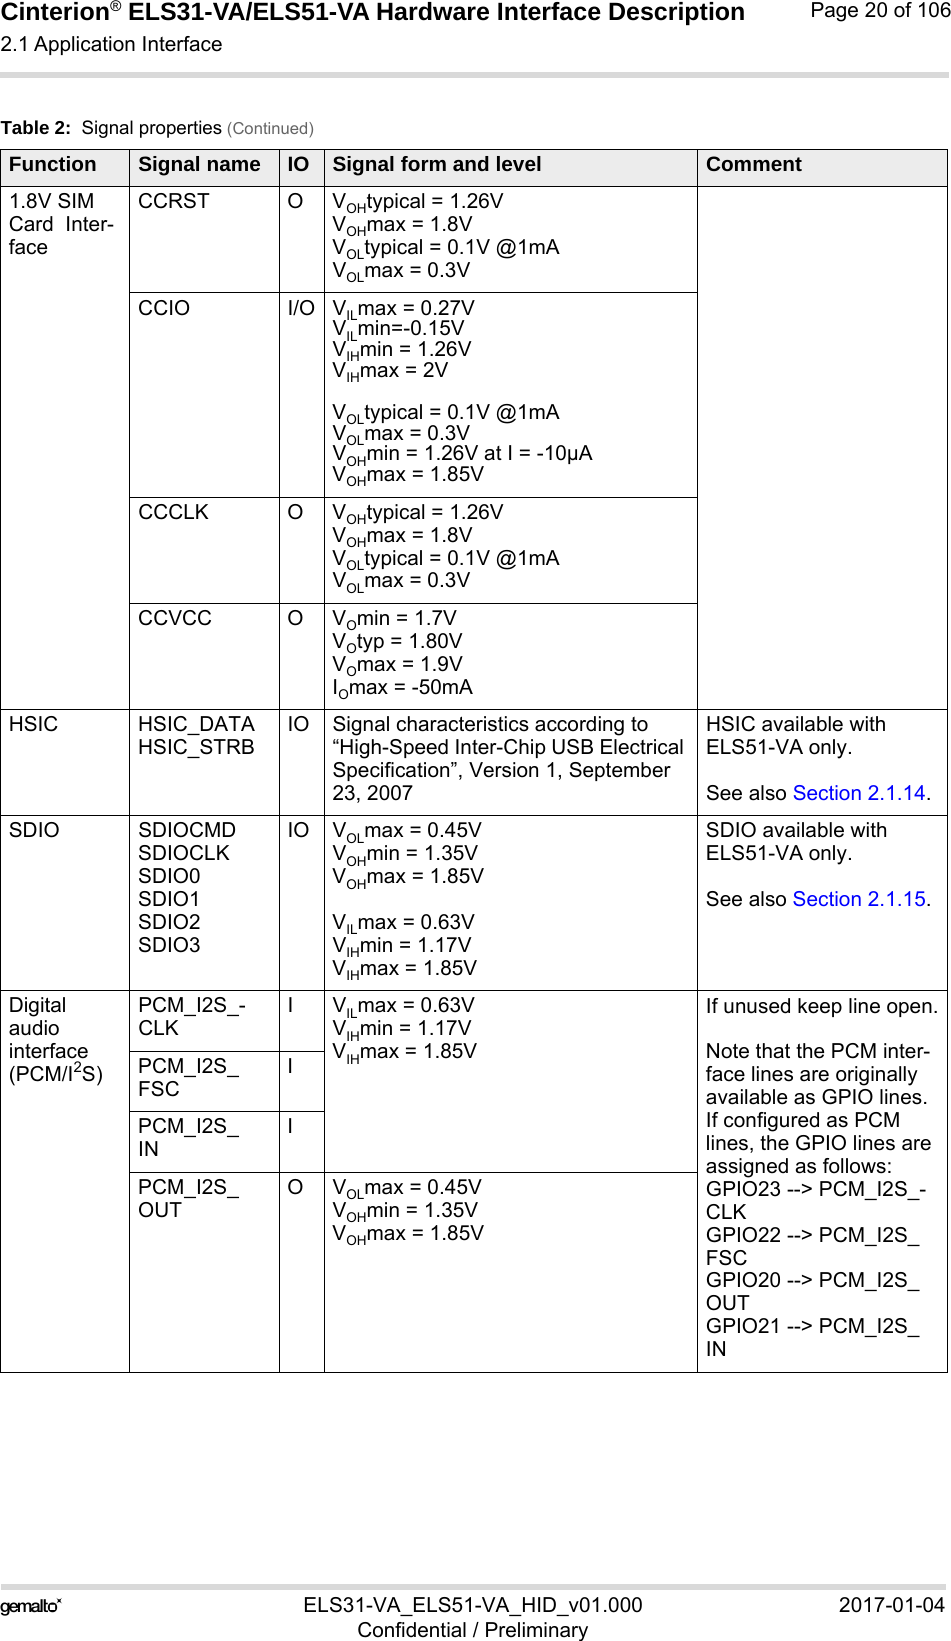 Cinterion® ELS31-VA/ELS51-VA Hardware Interface Description2.1 Application Interface56ELS31-VA_ELS51-VA_HID_v01.000 2017-01-04Confidential / PreliminaryPage 20 of 1061.8V SIM Card  Inter-faceCCRST O VOHtypical = 1.26VVOHmax = 1.8VVOLtypical = 0.1V @1mAVOLmax = 0.3VCCIO I/O VILmax = 0.27V VILmin=-0.15VVIHmin = 1.26V VIHmax = 2VVOLtypical = 0.1V @1mAVOLmax = 0.3V VOHmin = 1.26V at I = -10µA VOHmax = 1.85VCCCLK O VOHtypical = 1.26VVOHmax = 1.8VVOLtypical = 0.1V @1mAVOLmax = 0.3VCCVCC O VOmin = 1.7V VOtyp = 1.80V VOmax = 1.9VIOmax = -50mAHSIC HSIC_DATAHSIC_STRBIO Signal characteristics according to “High-Speed Inter-Chip USB Electrical Specification”, Version 1, September 23, 2007HSIC available with ELS51-VA only.See also Section 2.1.14.SDIO SDIOCMDSDIOCLKSDIO0SDIO1SDIO2SDIO3IO VOLmax = 0.45VVOHmin = 1.35VVOHmax = 1.85VVILmax = 0.63V VIHmin = 1.17V VIHmax = 1.85VSDIO available with ELS51-VA only.See also Section 2.1.15.Digital audio interface(PCM/I2S)PCM_I2S_-CLKIVILmax = 0.63V VIHmin = 1.17V VIHmax = 1.85VIf unused keep line open.Note that the PCM inter-face lines are originally available as GPIO lines. If configured as PCM lines, the GPIO lines are assigned as follows: GPIO23 --&gt; PCM_I2S_-CLKGPIO22 --&gt; PCM_I2S_FSCGPIO20 --&gt; PCM_I2S_OUTGPIO21 --&gt; PCM_I2S_INPCM_I2S_FSCIPCM_I2S_INIPCM_I2S_OUTOVOLmax = 0.45VVOHmin = 1.35VVOHmax = 1.85VTable 2:  Signal properties (Continued)Function Signal name IO Signal form and level Comment